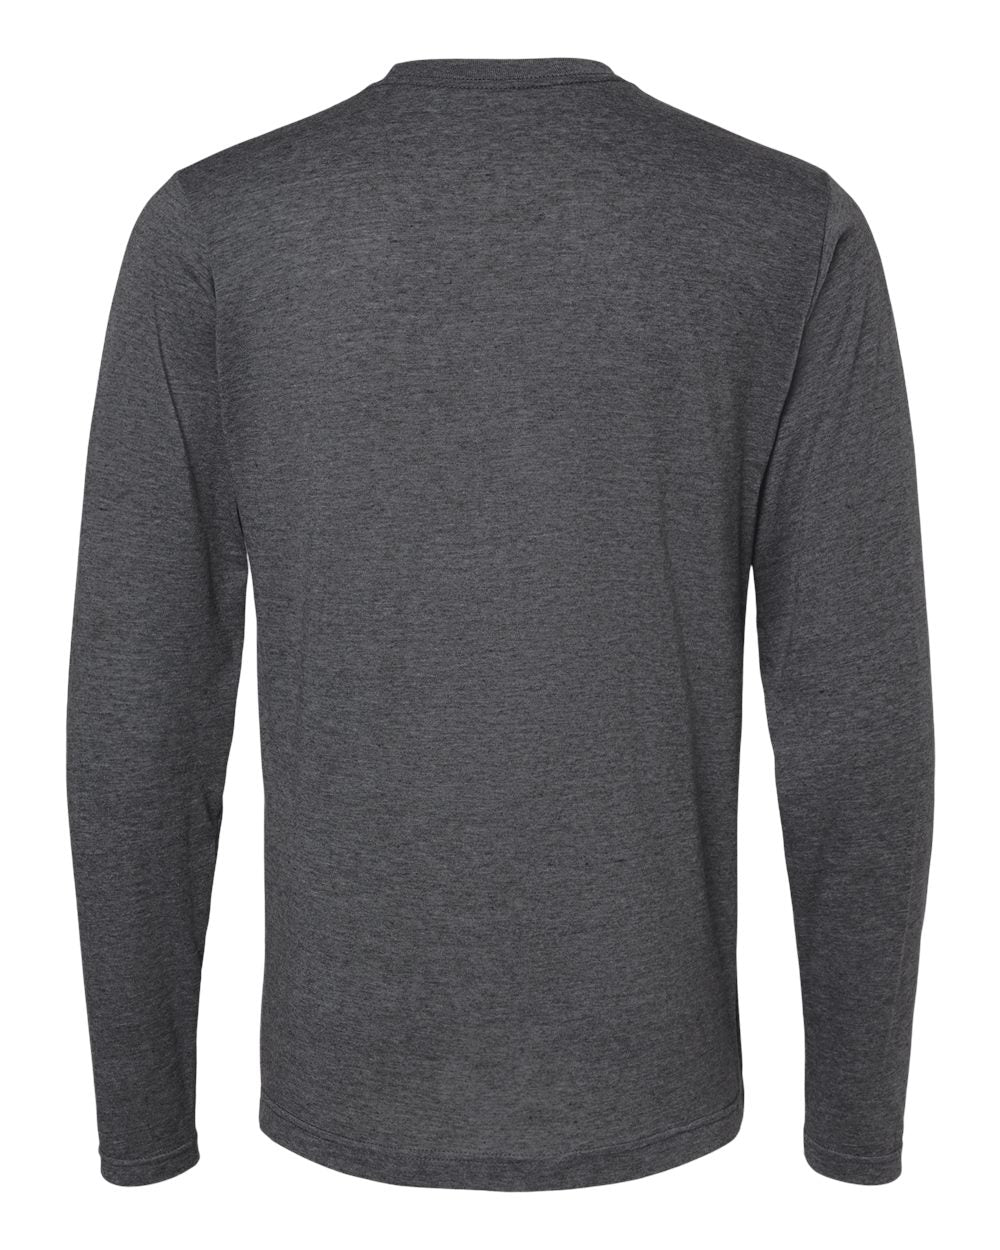 M&O Poly-Blend Long Sleeve T-Shirt 3520 #color_Heather Charcoal